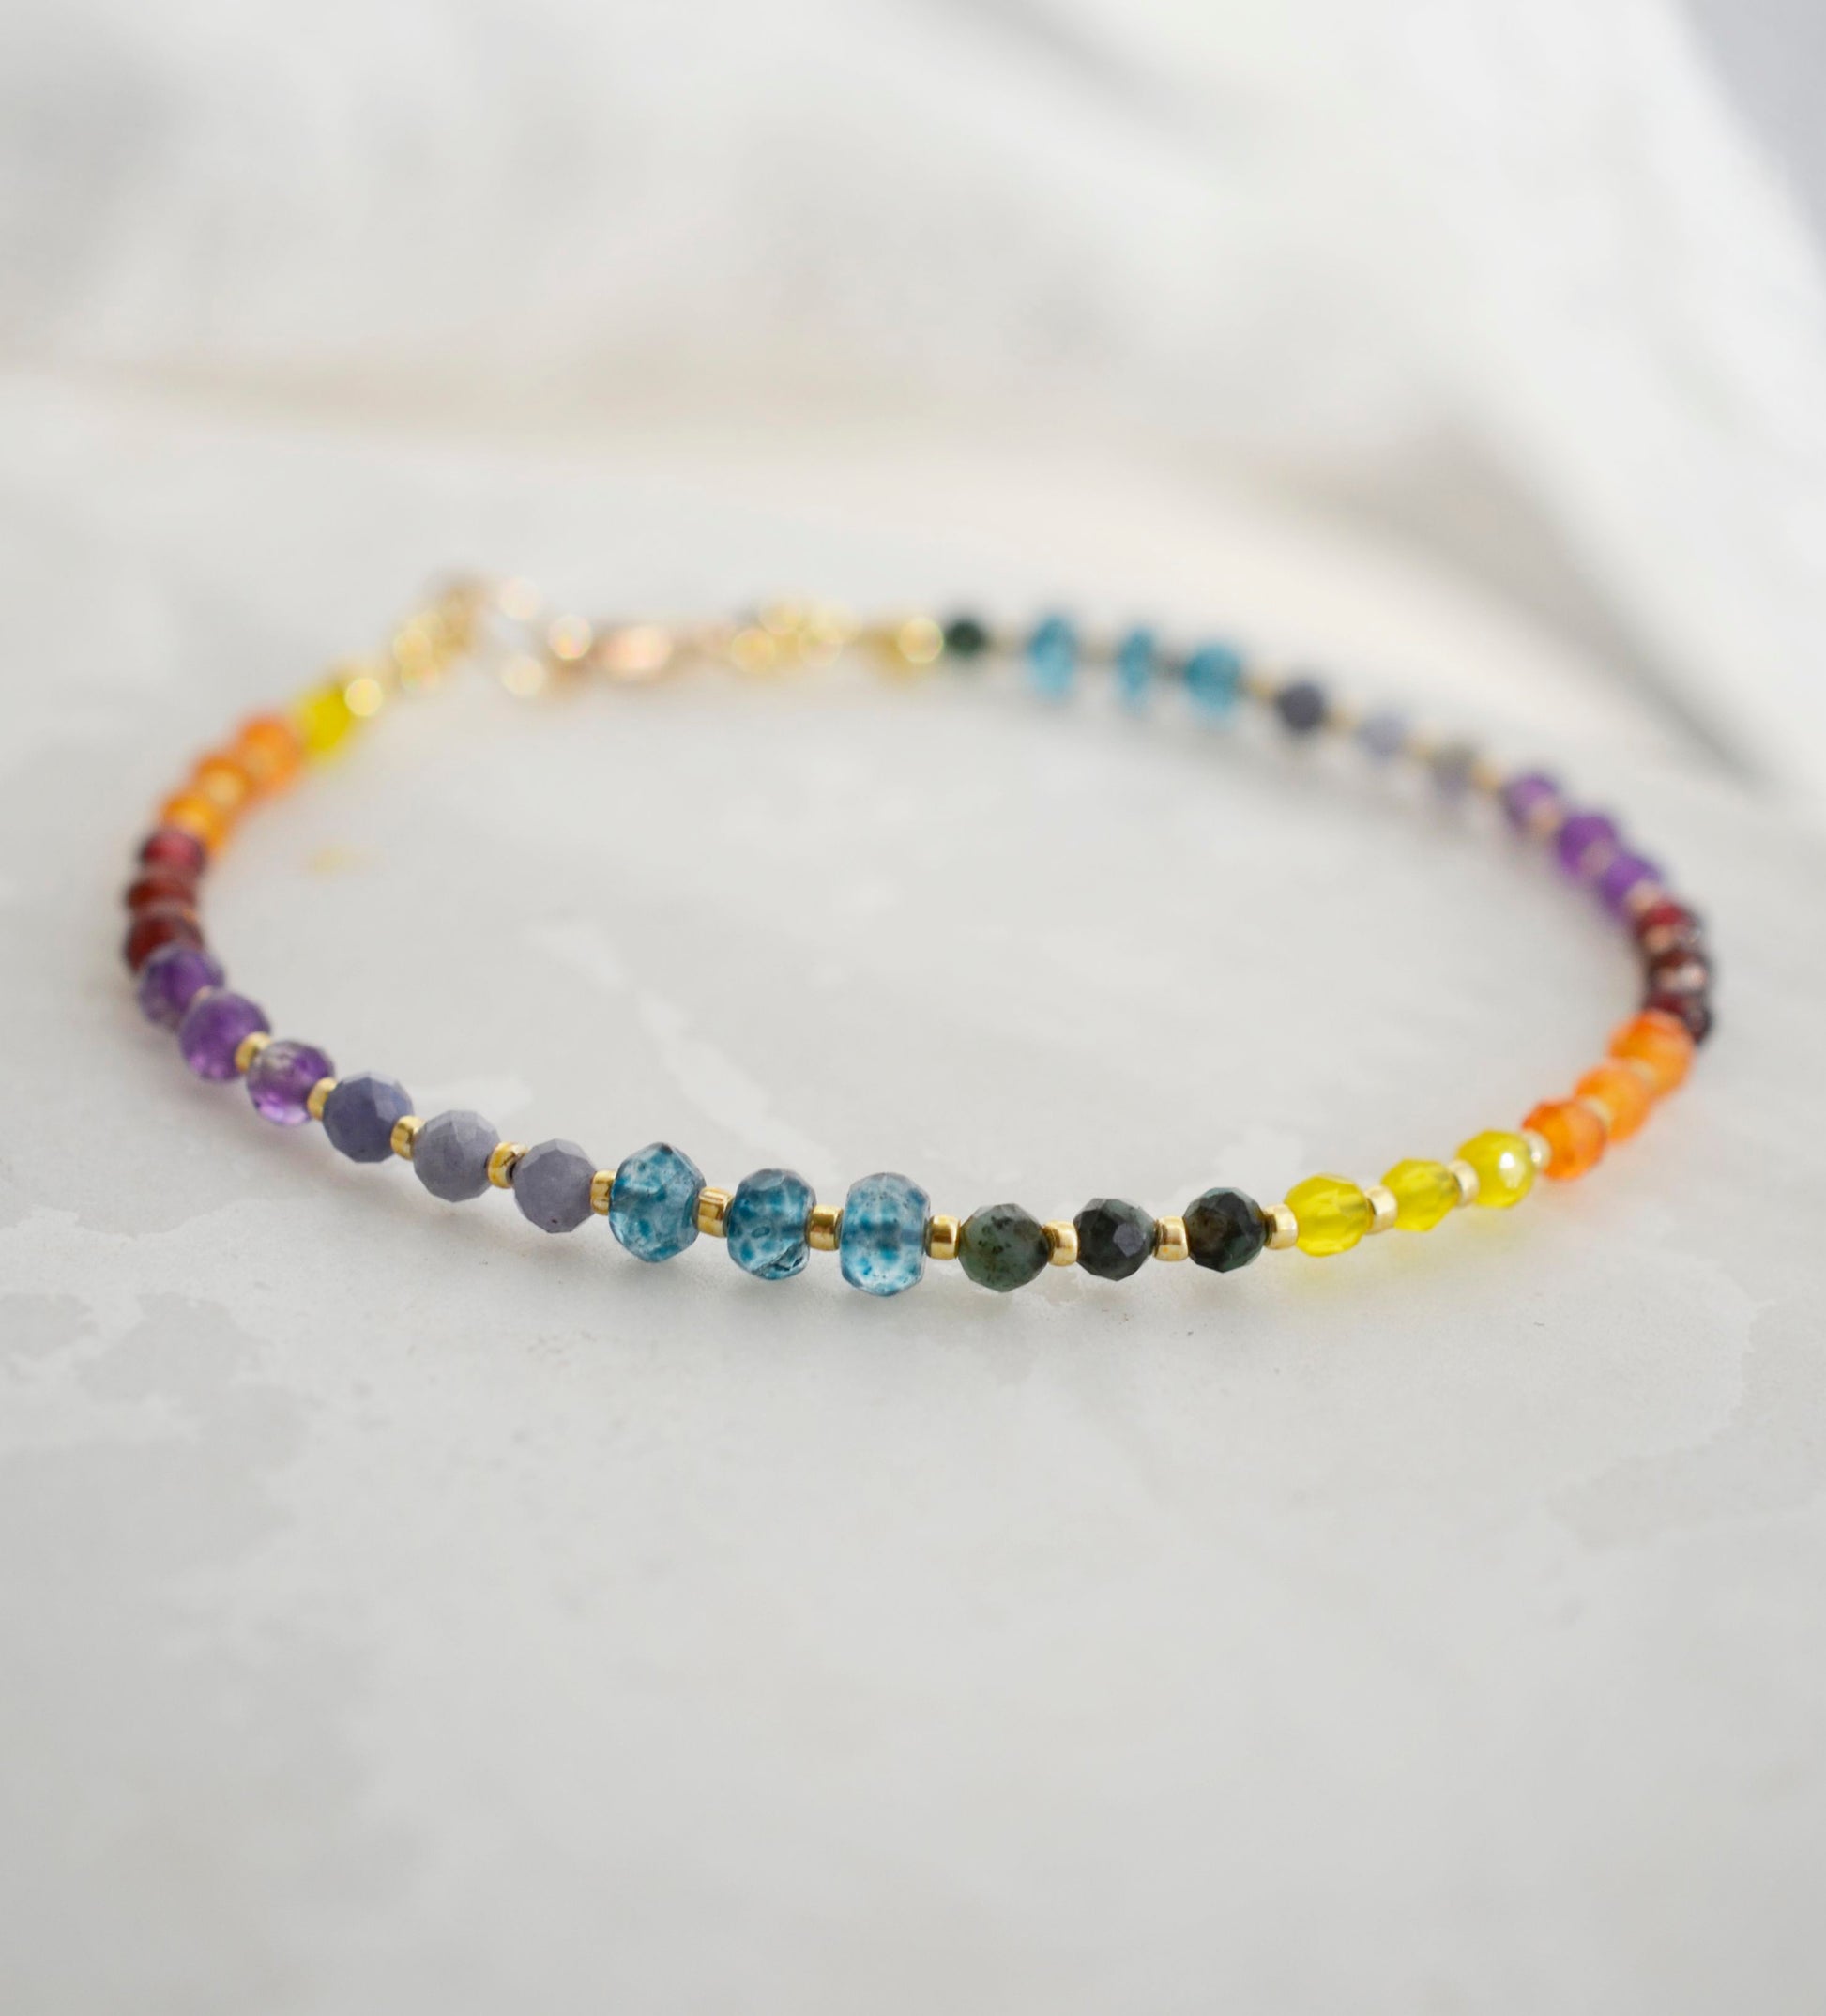 Beaded gemstone bracelet in rainbow colors. Handmade with natural gemstones including: yellow agate, orange carnelian, wine-red garnet, amethyst, tanzanite, topaz, and green emerald. Shown with a gold clasp.